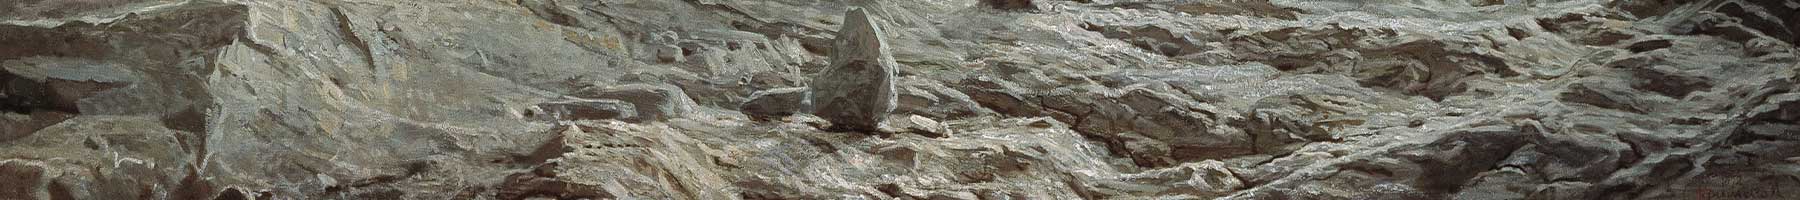 painting of Christ sitting on rocks in a desolate wilderness